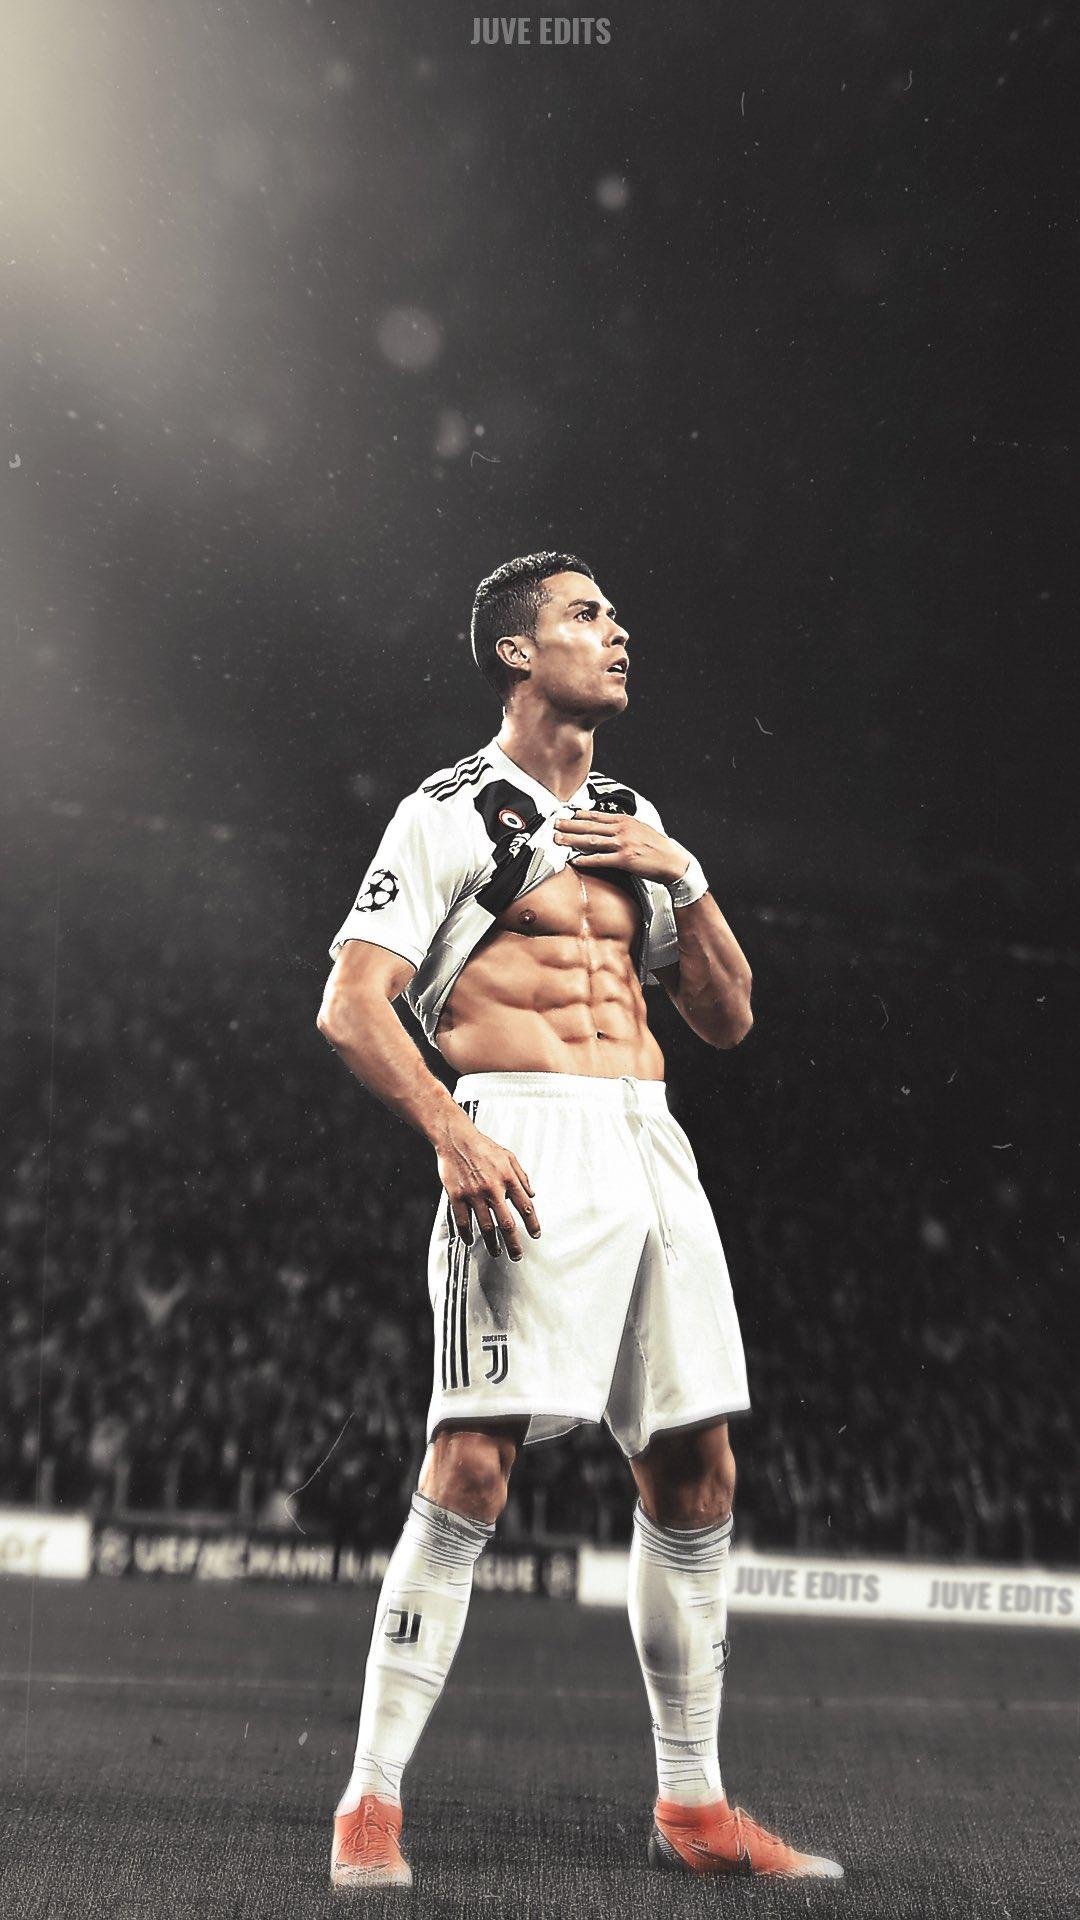 Cristiano Ronaldos Siiiiuuu goal celebration with Manchester United team  jersey 2K wallpaper download